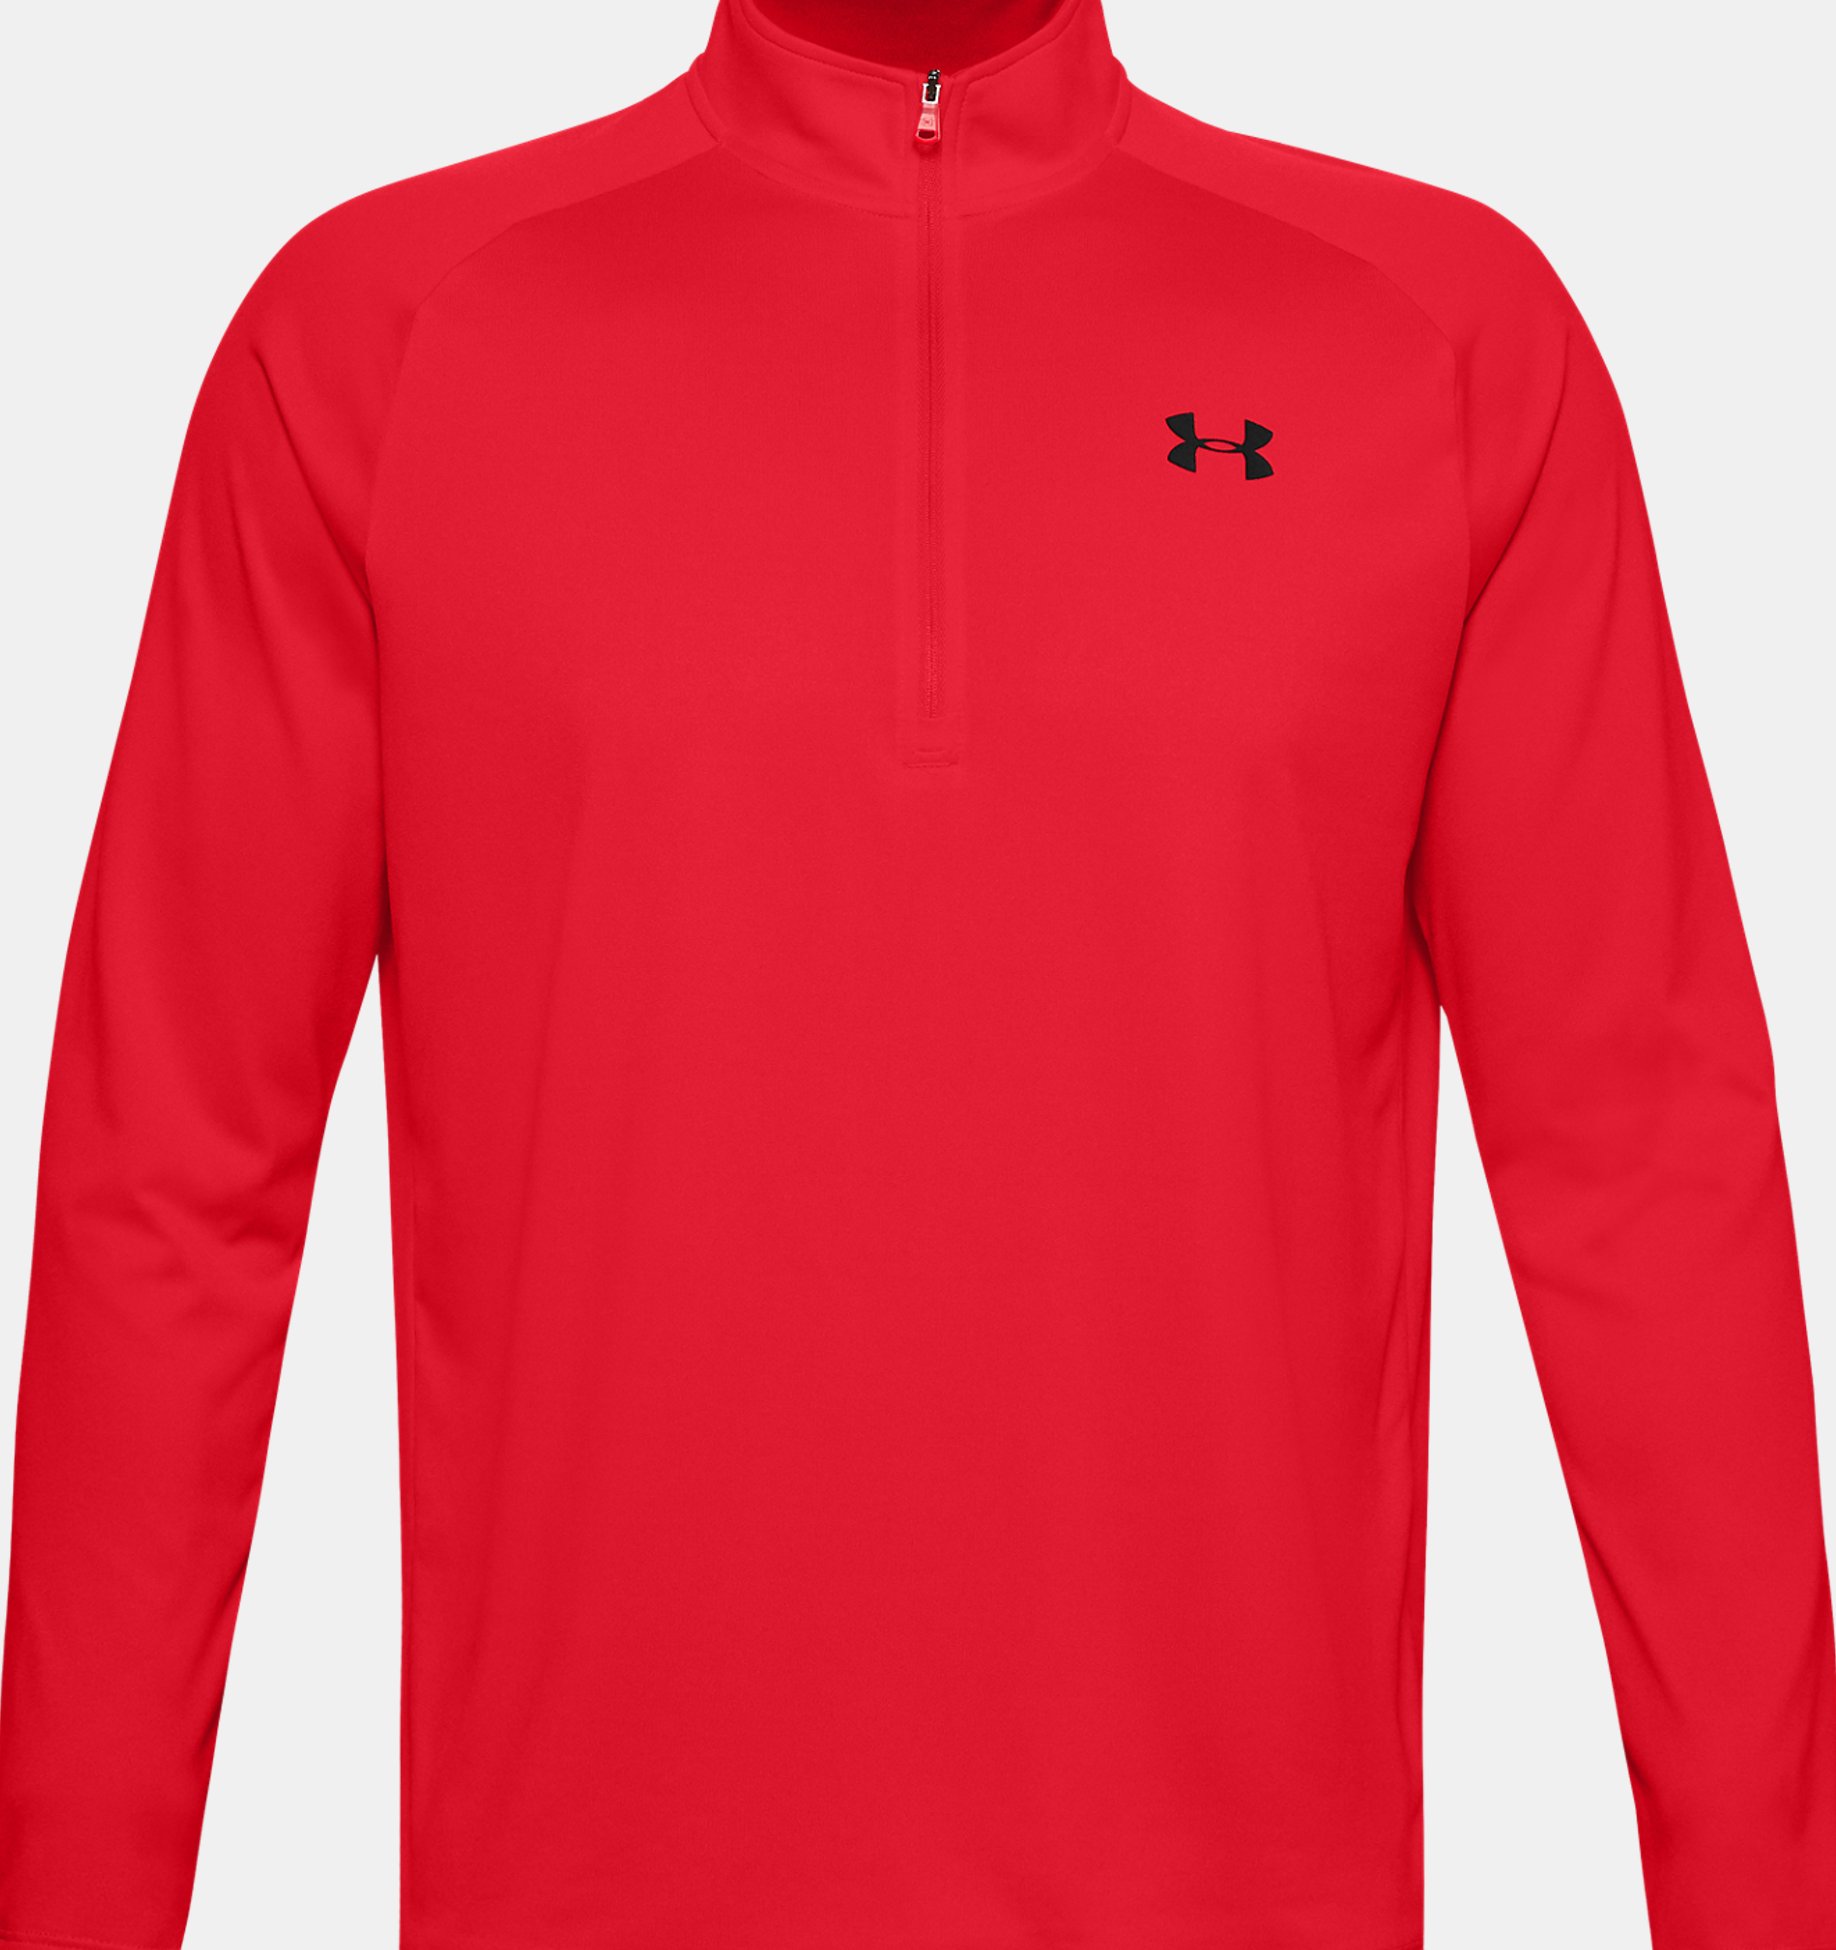 Light and Breathable Zip Up Top for Working Out Under Armour Men's Tech 2.0 1/2 Zip Versatile Warm Up Top for Men 